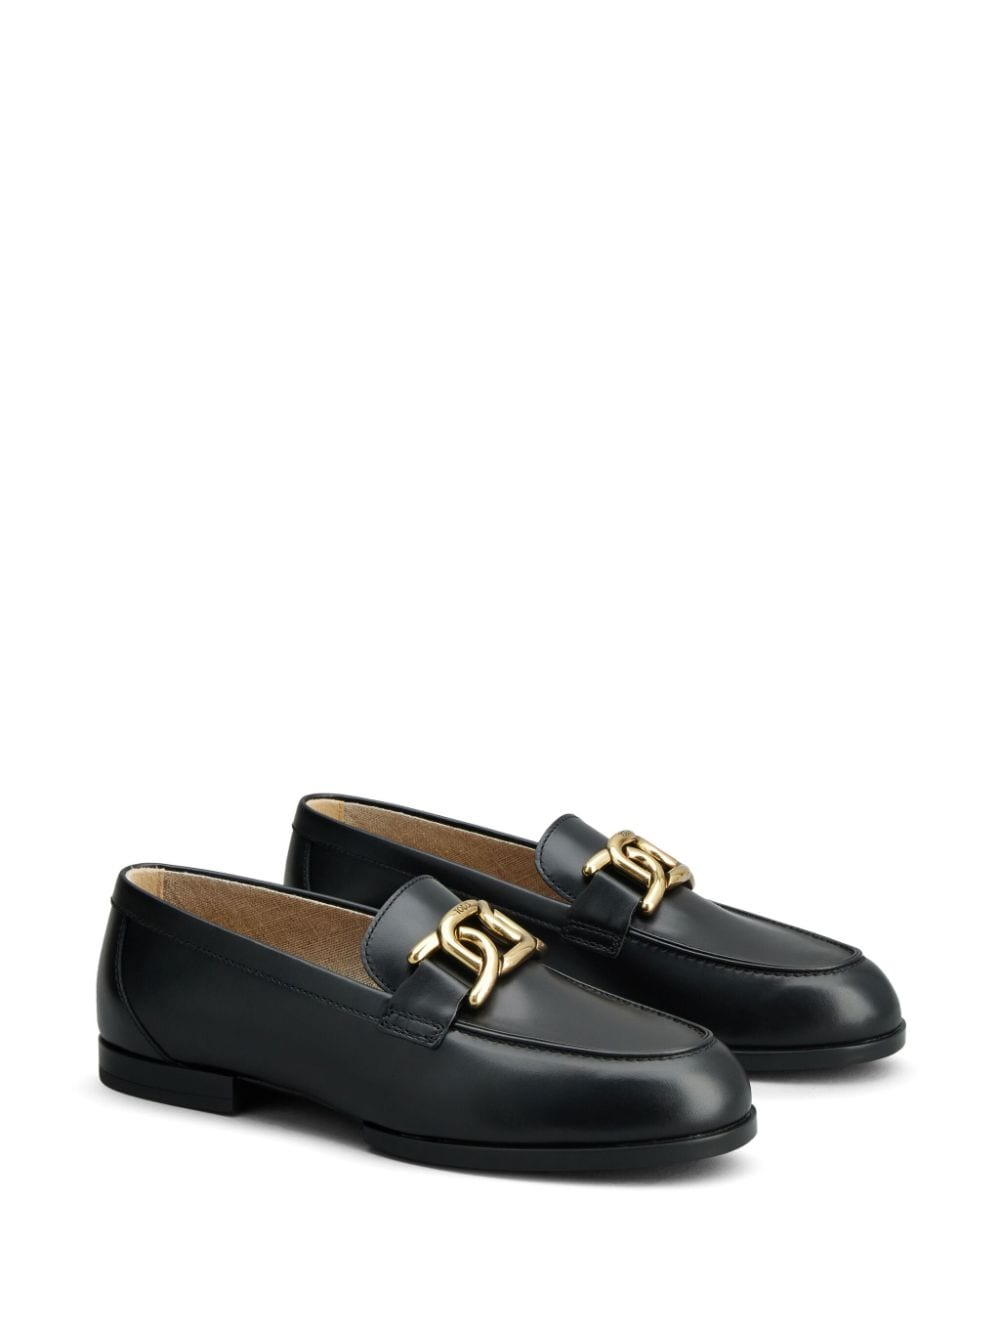 TOD'S Black Leather Chain-Link Loafers for Women